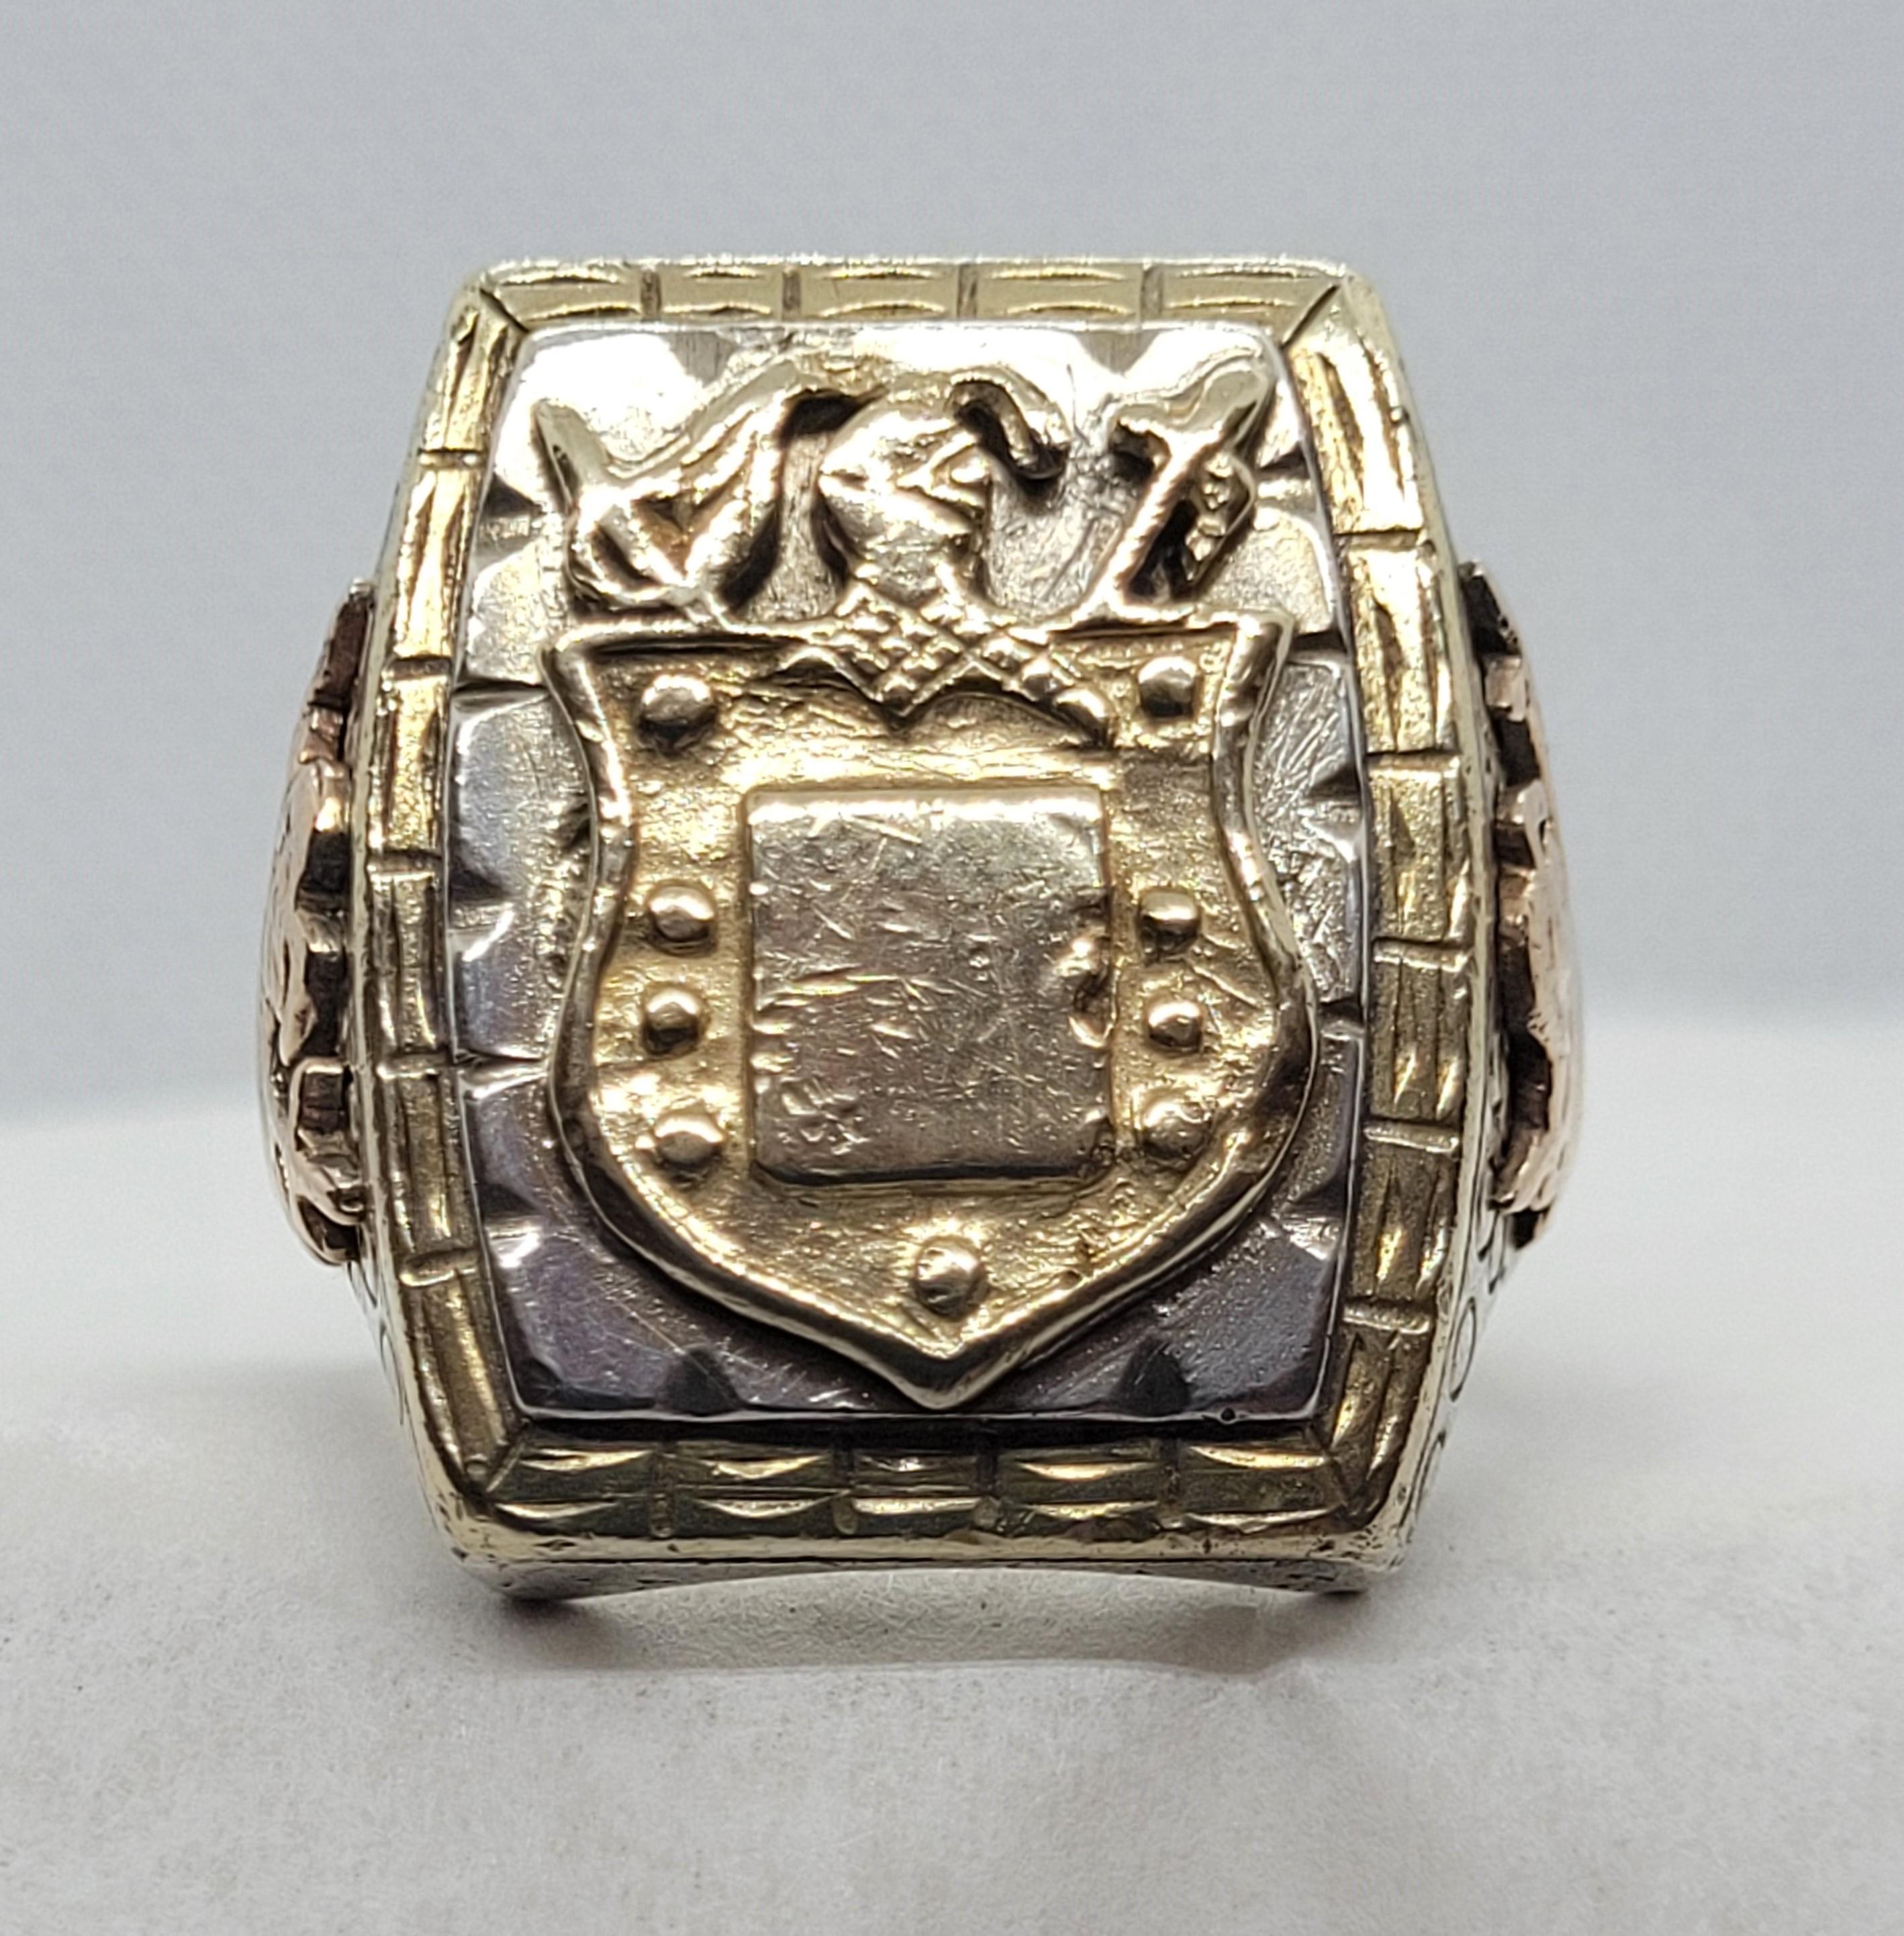 Unique men's crest ring that is silver and two-tone copper and brass. This heavy ring has a detailed crest shield design that has a space for personalized engraving; 24mm x 20mm in diameter on the face of the ring. The ring is 30 grams, size 10,